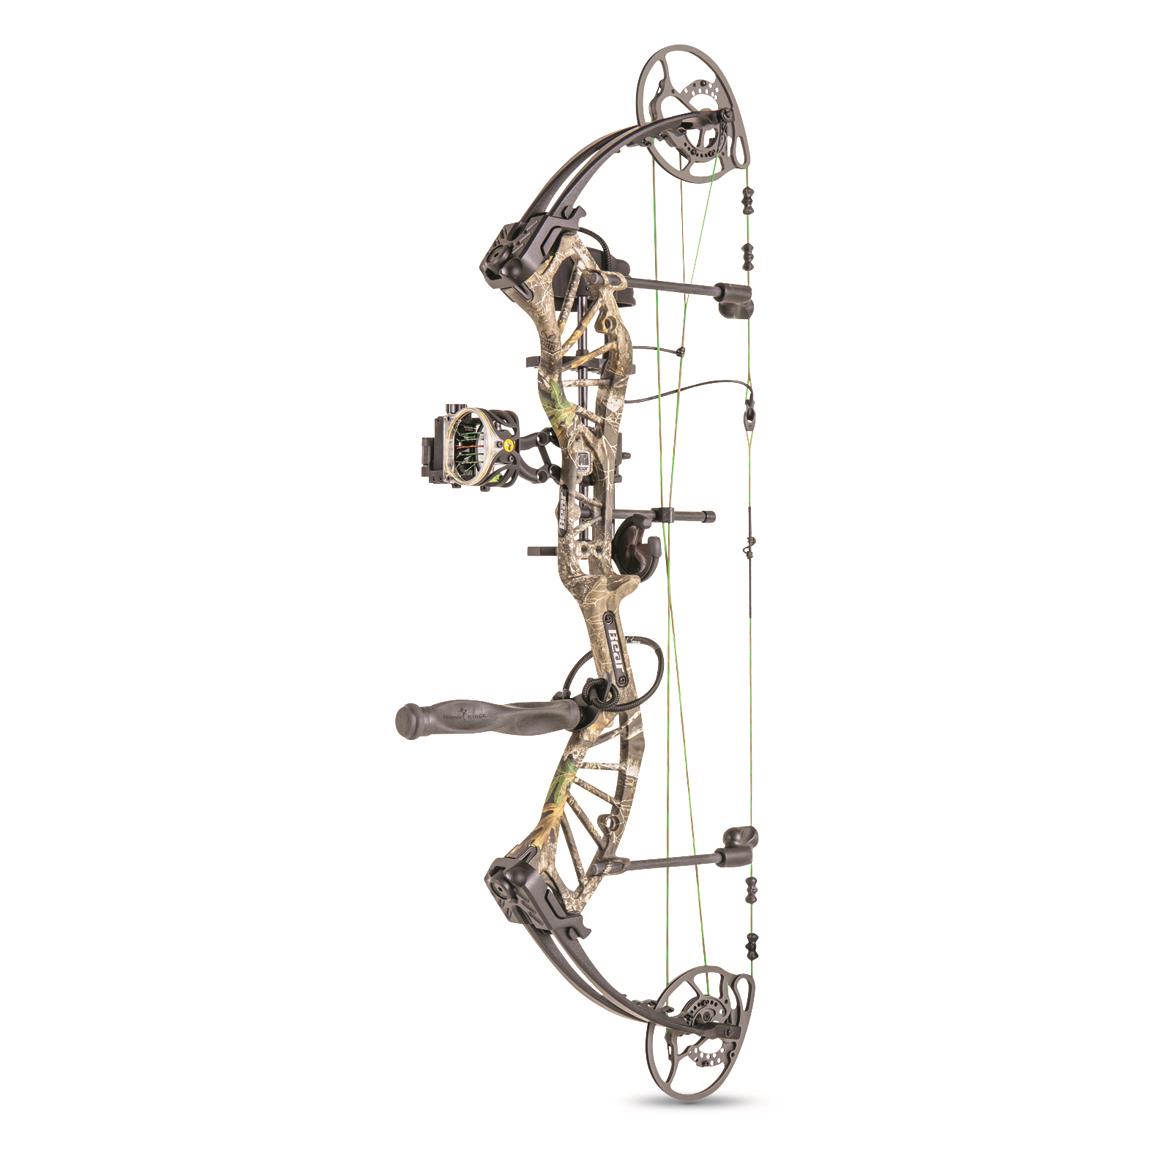 Bear Trace HC Ready-to-Hunt Compound Bow Package, 55-70 lb. Draw Weight, Right Hand, Realtree EDGE™